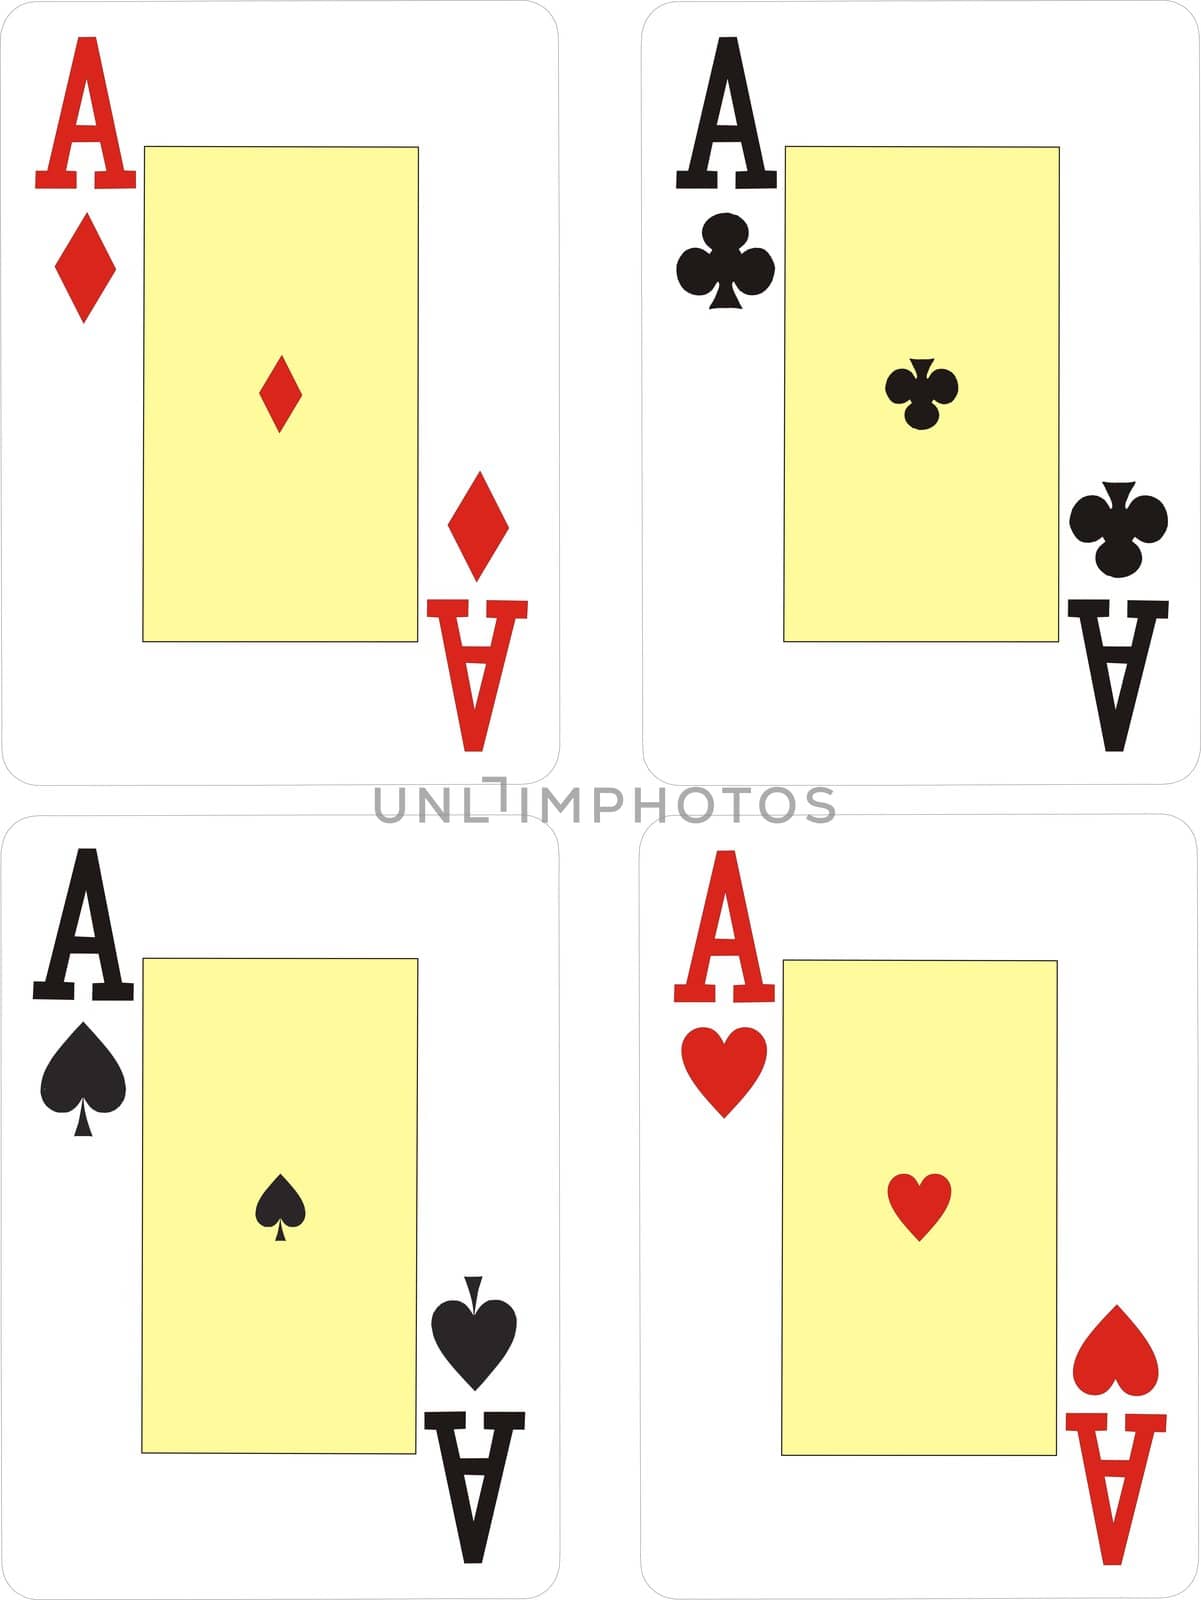 4 aces, a winning hand